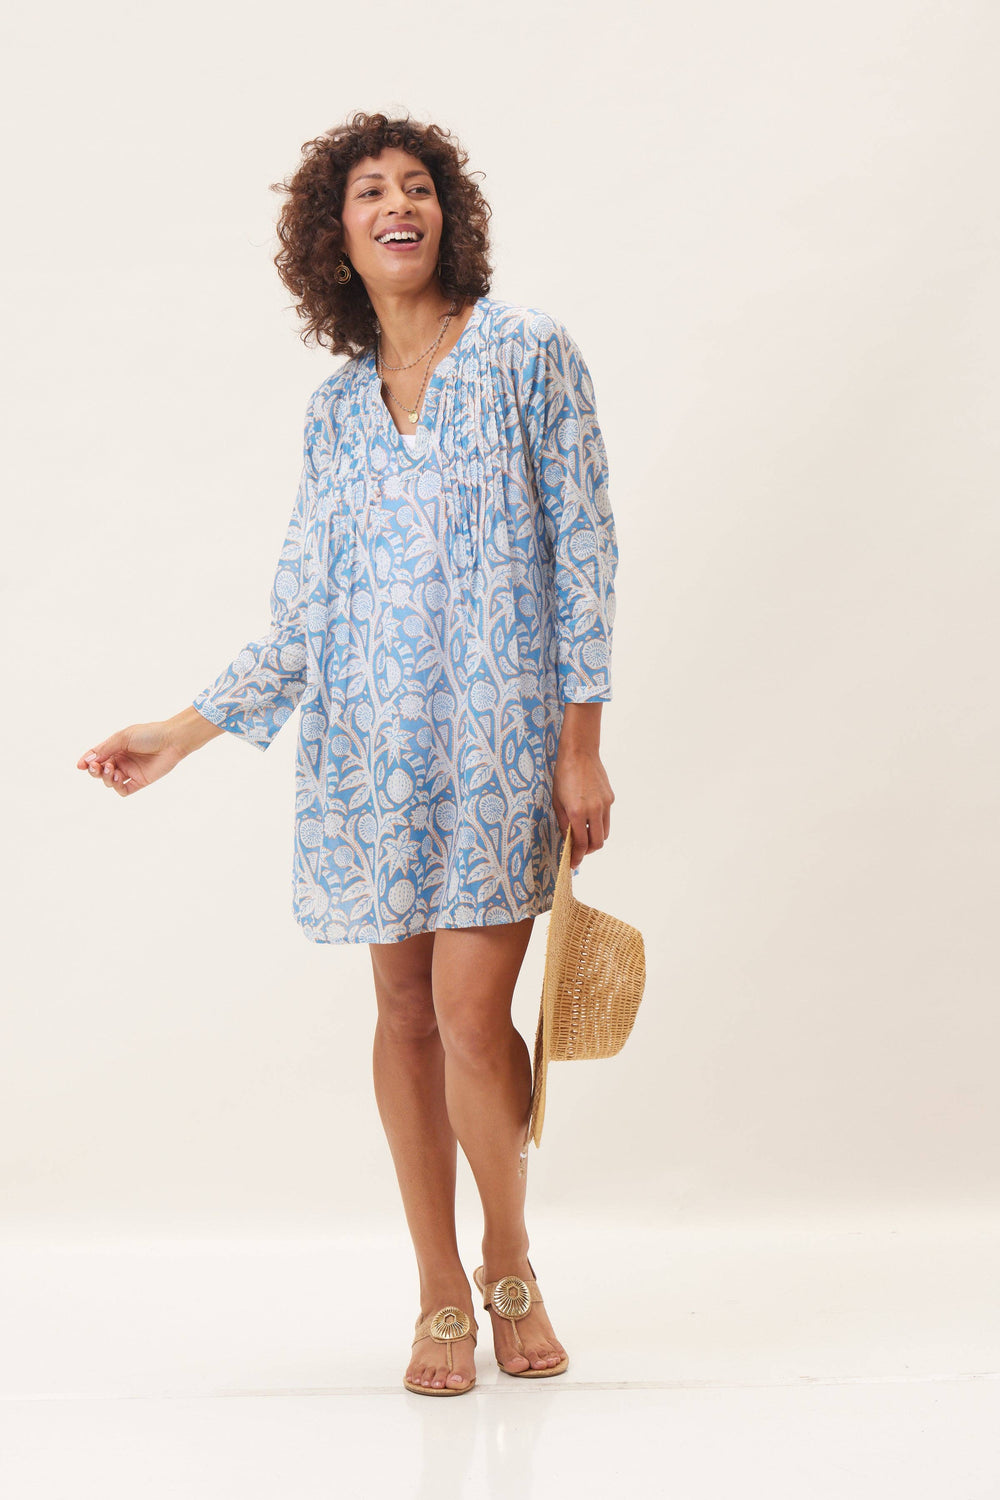 rockflowerpaper - FAR EAST BLUE Pintuck Beach Cover Up, Recycled Cotton